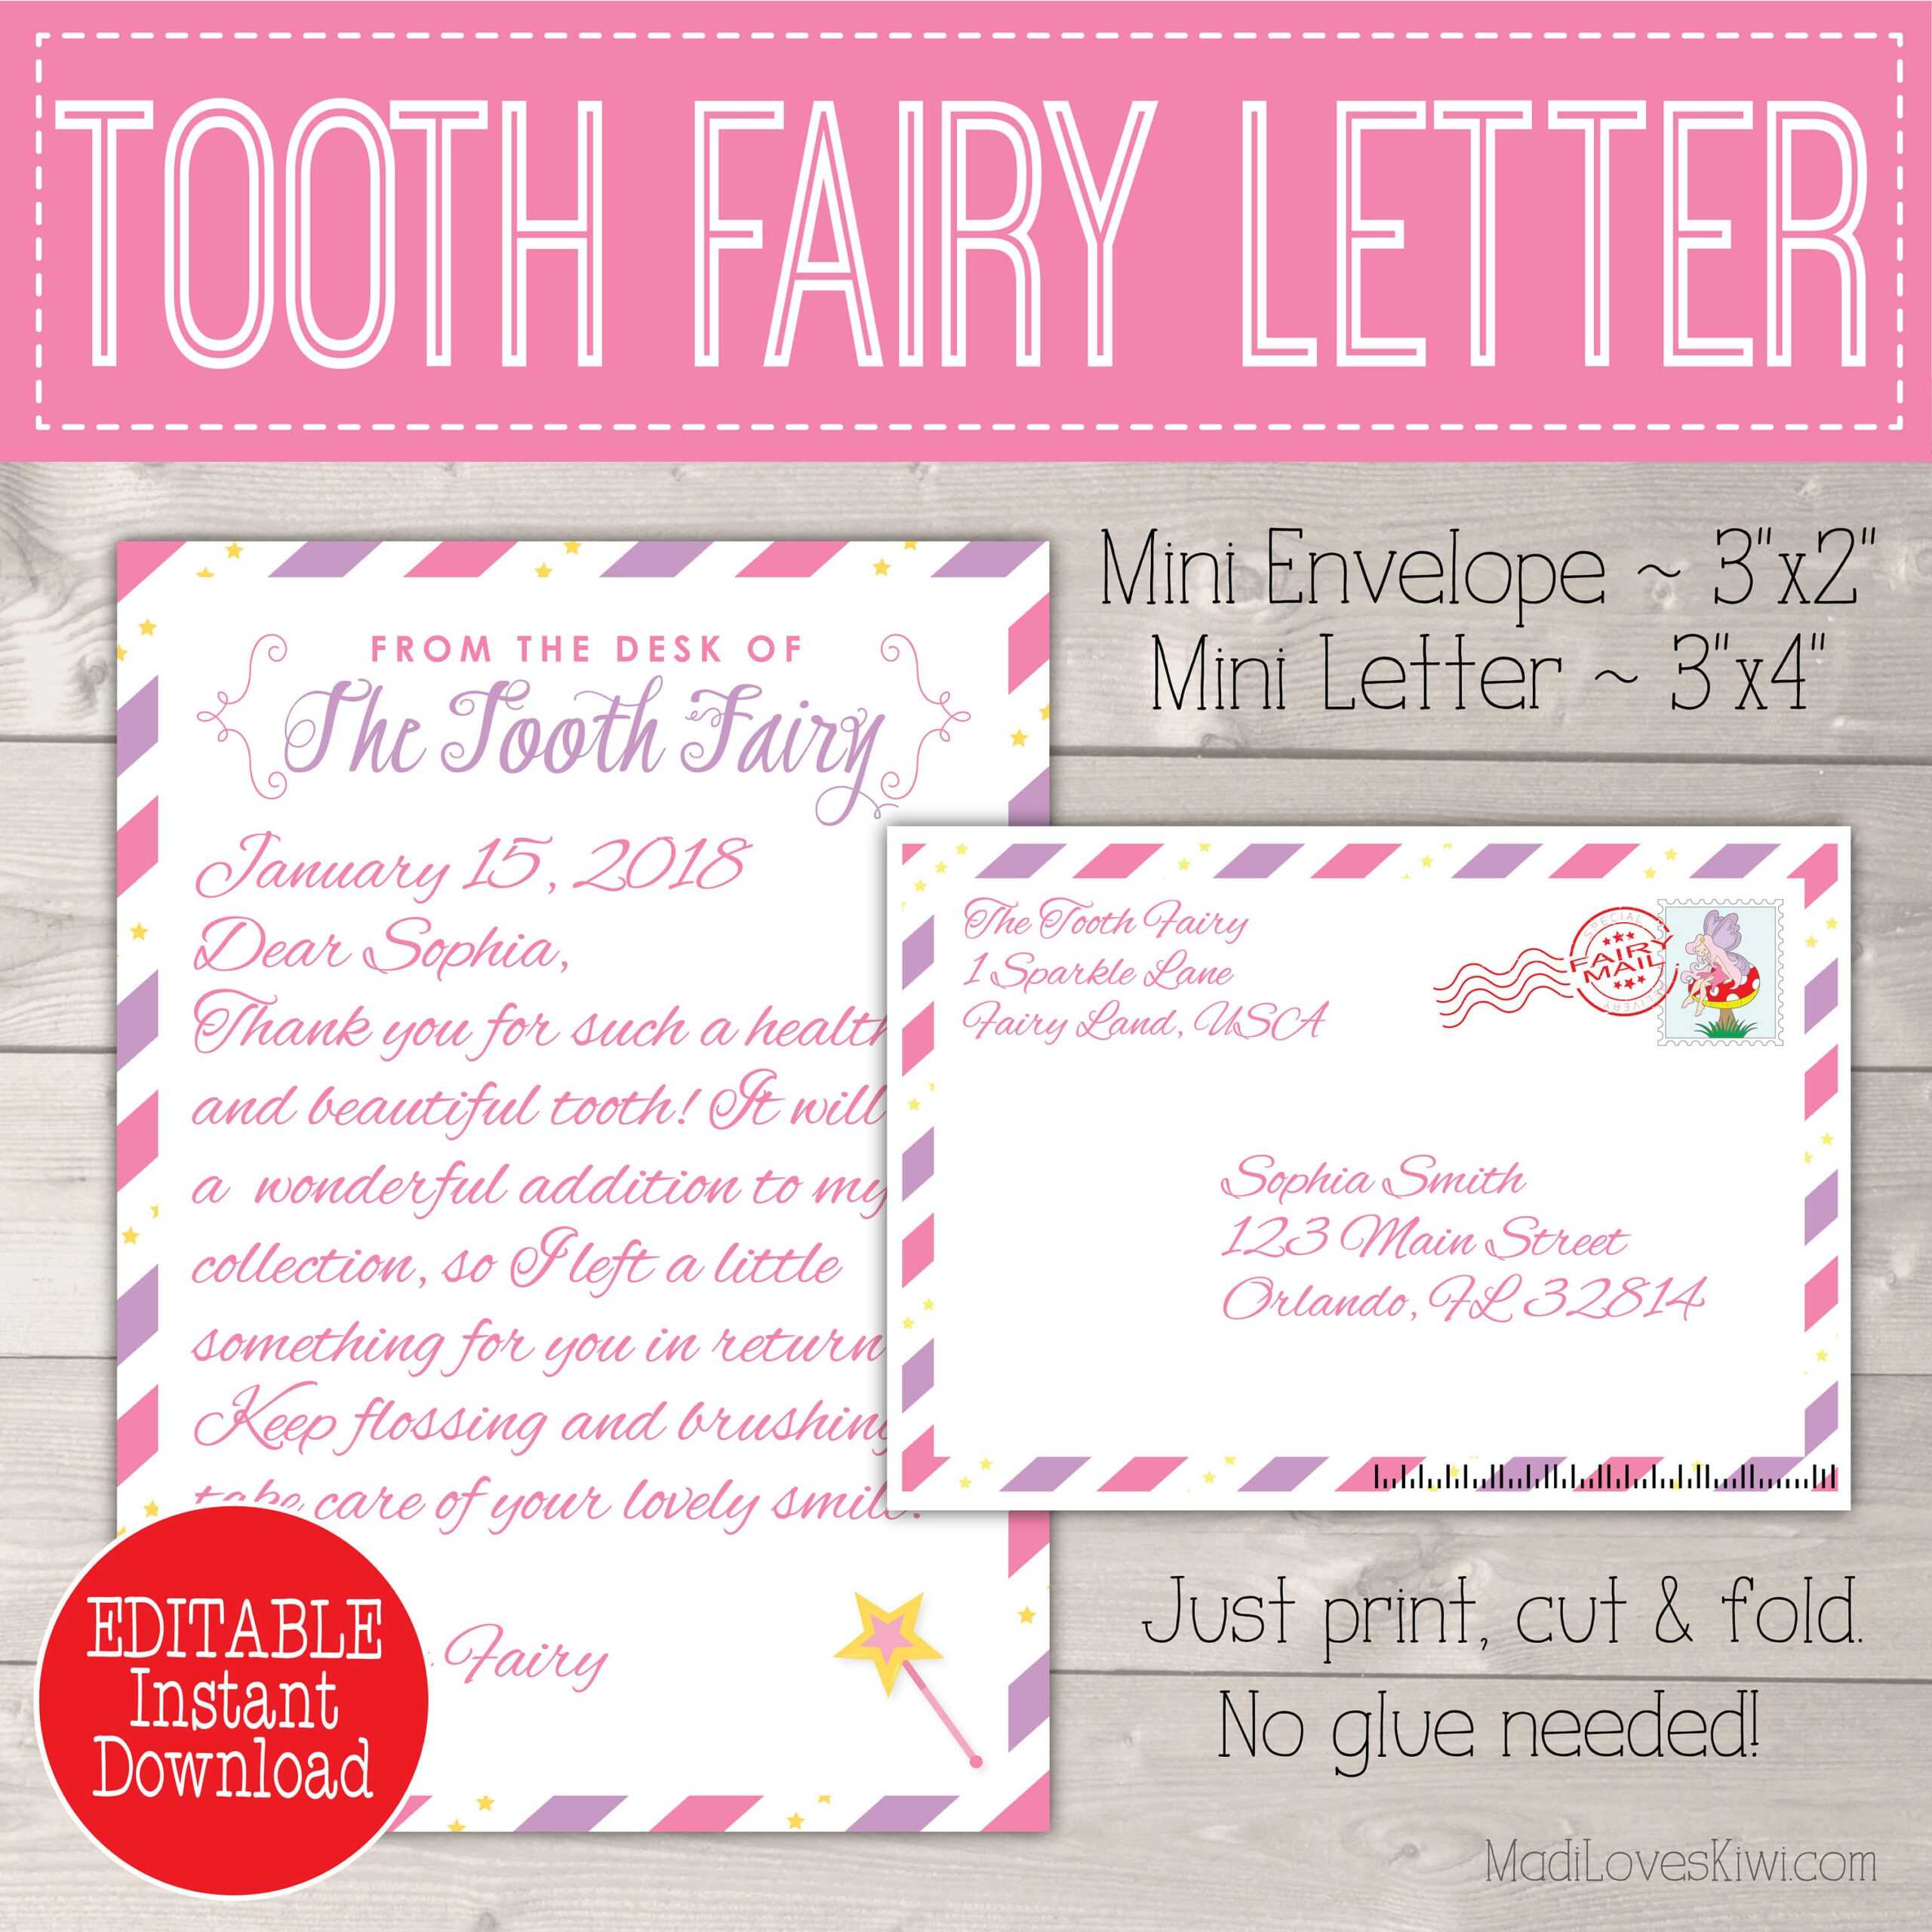 Editable Tooth Fairy Letter With Envelope | Printable Pink Inside Tooth Fairy Certificate Template Free